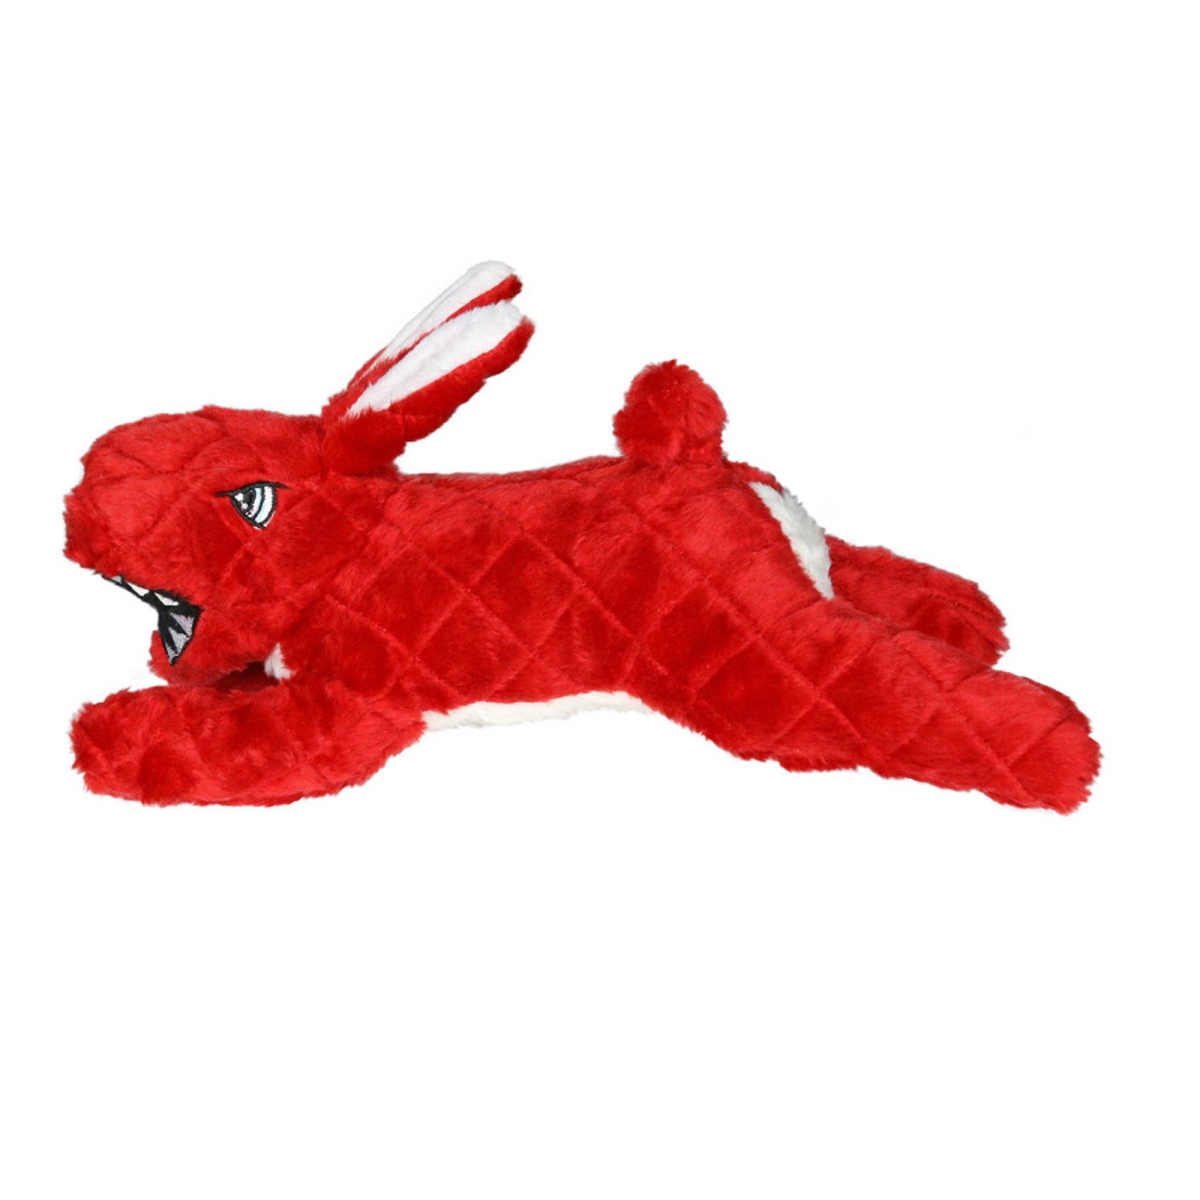 Picture of Vip Products 180181910463 12 in. Tuffy Mighty Angry Rabbit Animals Durable Dog Toy